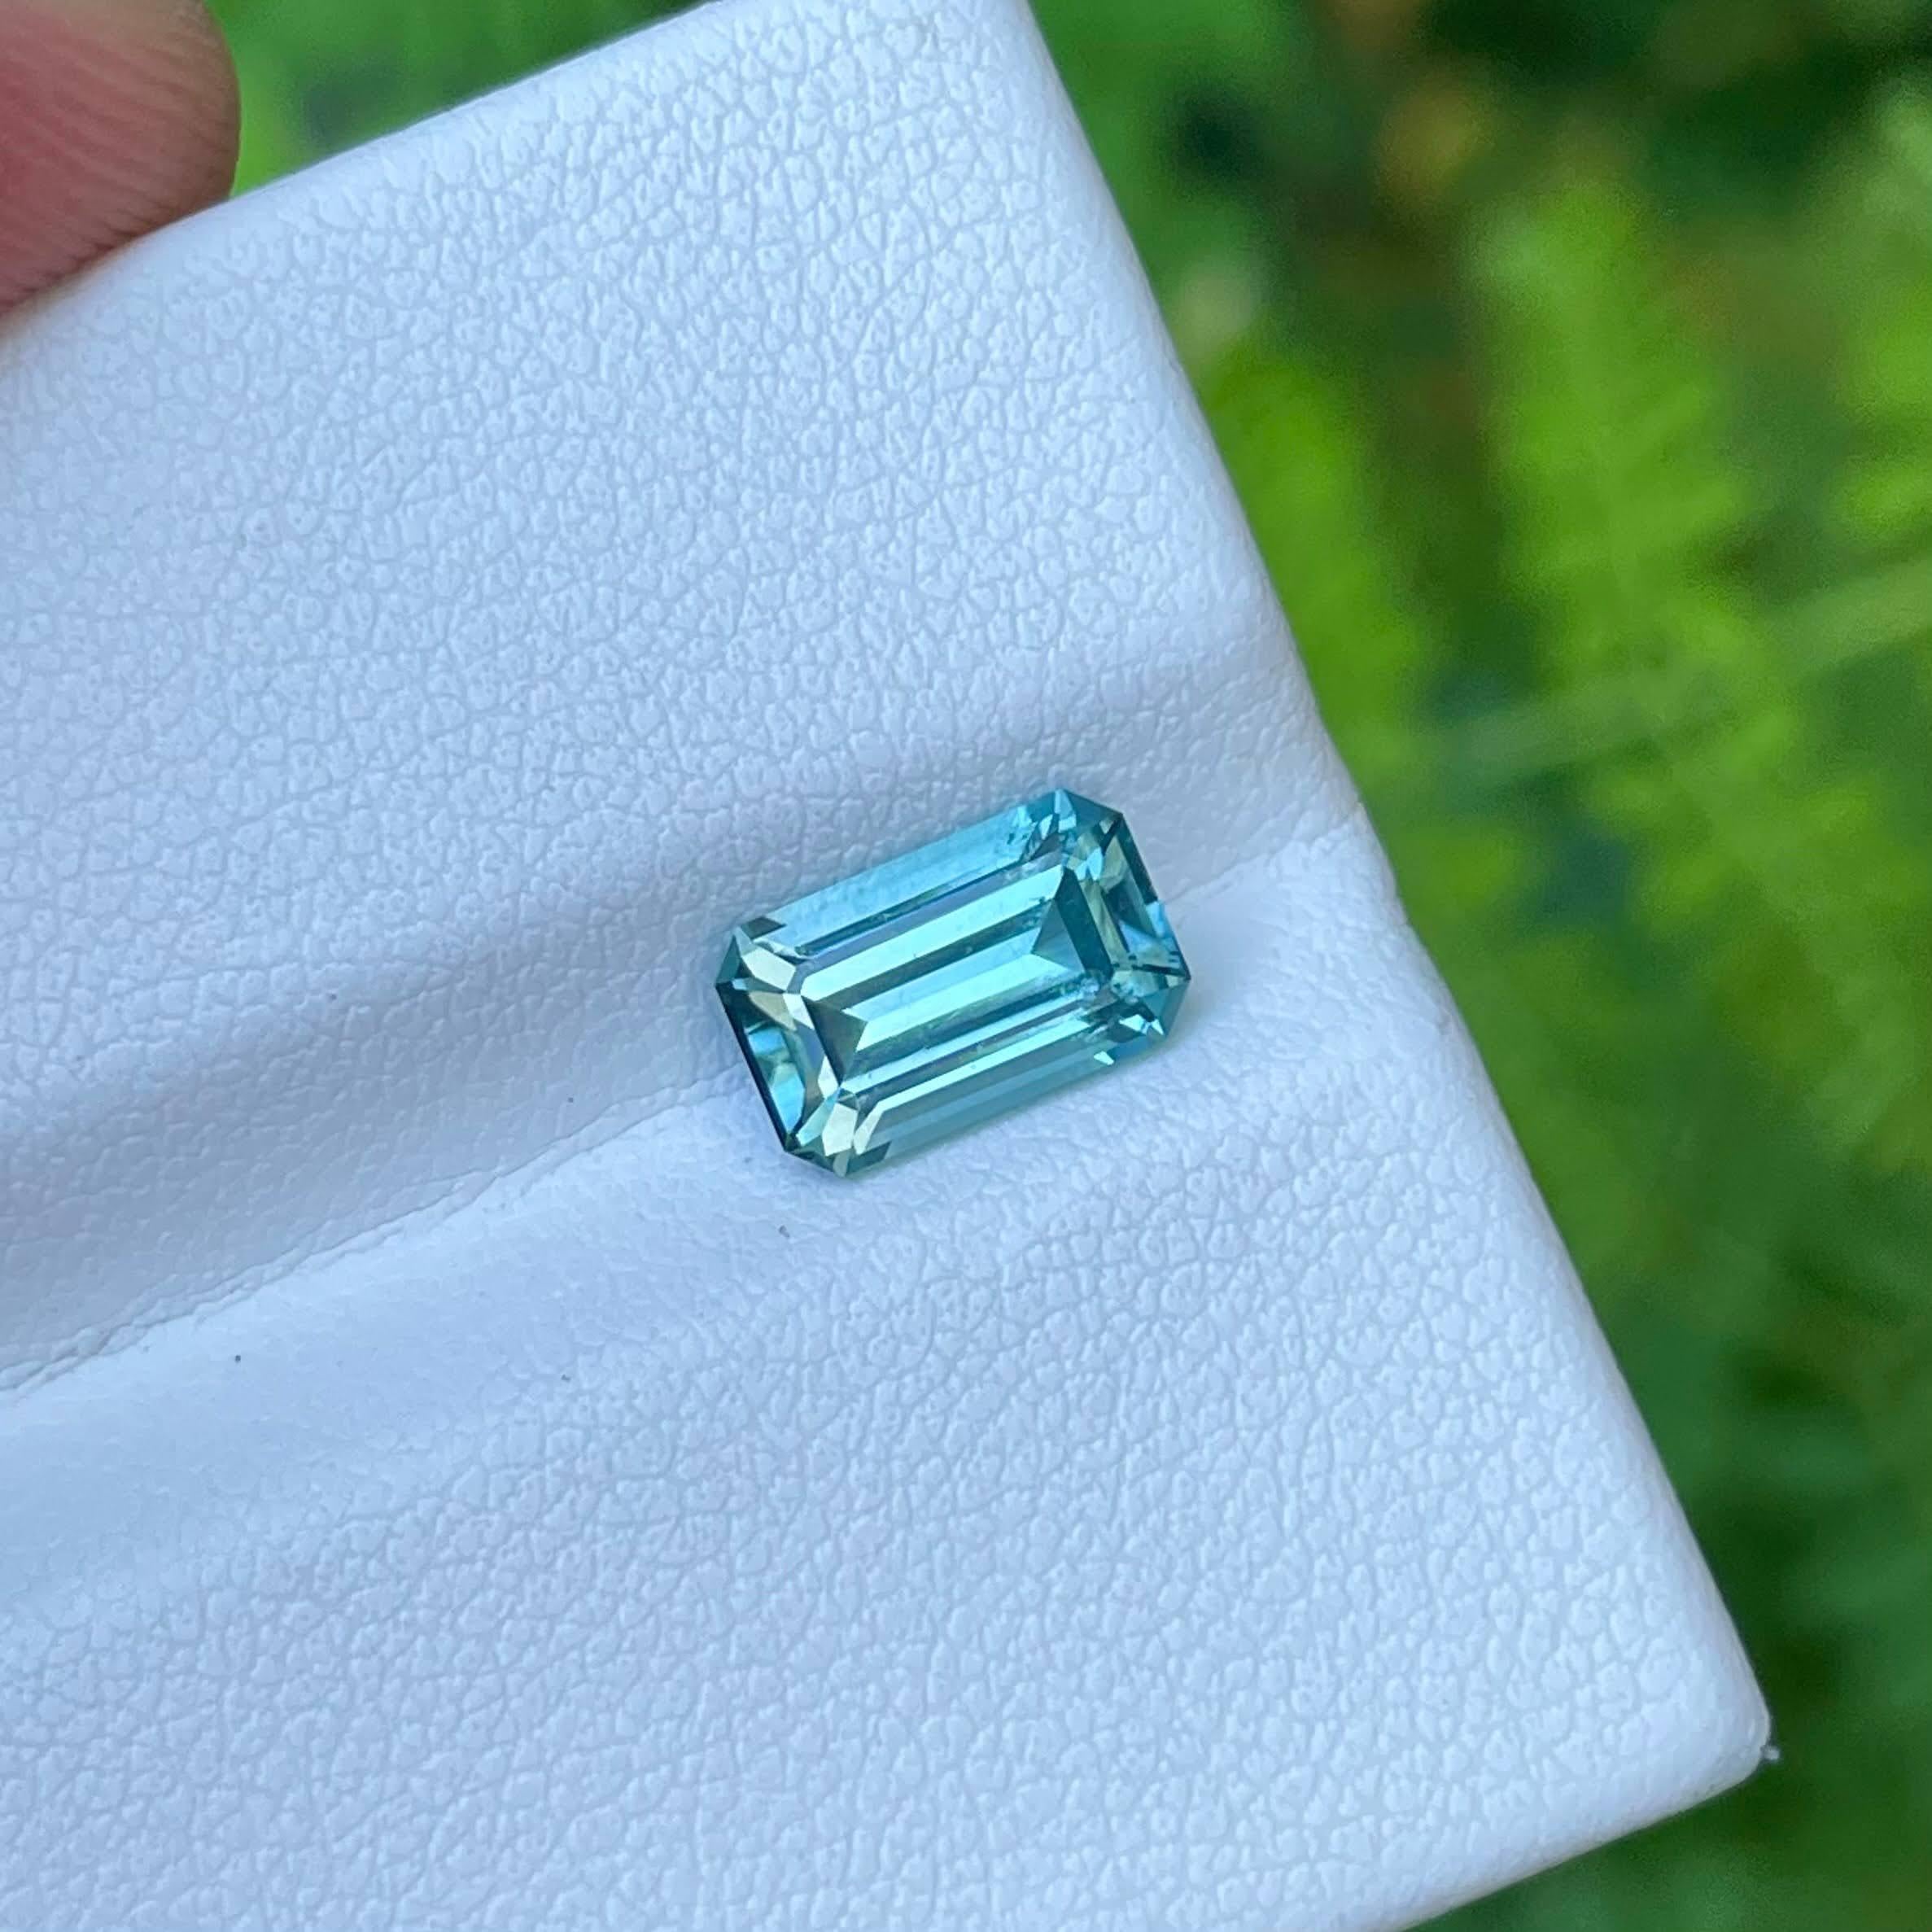 1.90 carats 
9.06x5.60x4.31 mm
Clarity Eye Clean
Treatment None
Origin Afghanistan
Shape Octagon
Cut Step Emerald




The 1.90 carat weight adds substance to its visual appeal, making it a statement piece for those who appreciate both subtlety and